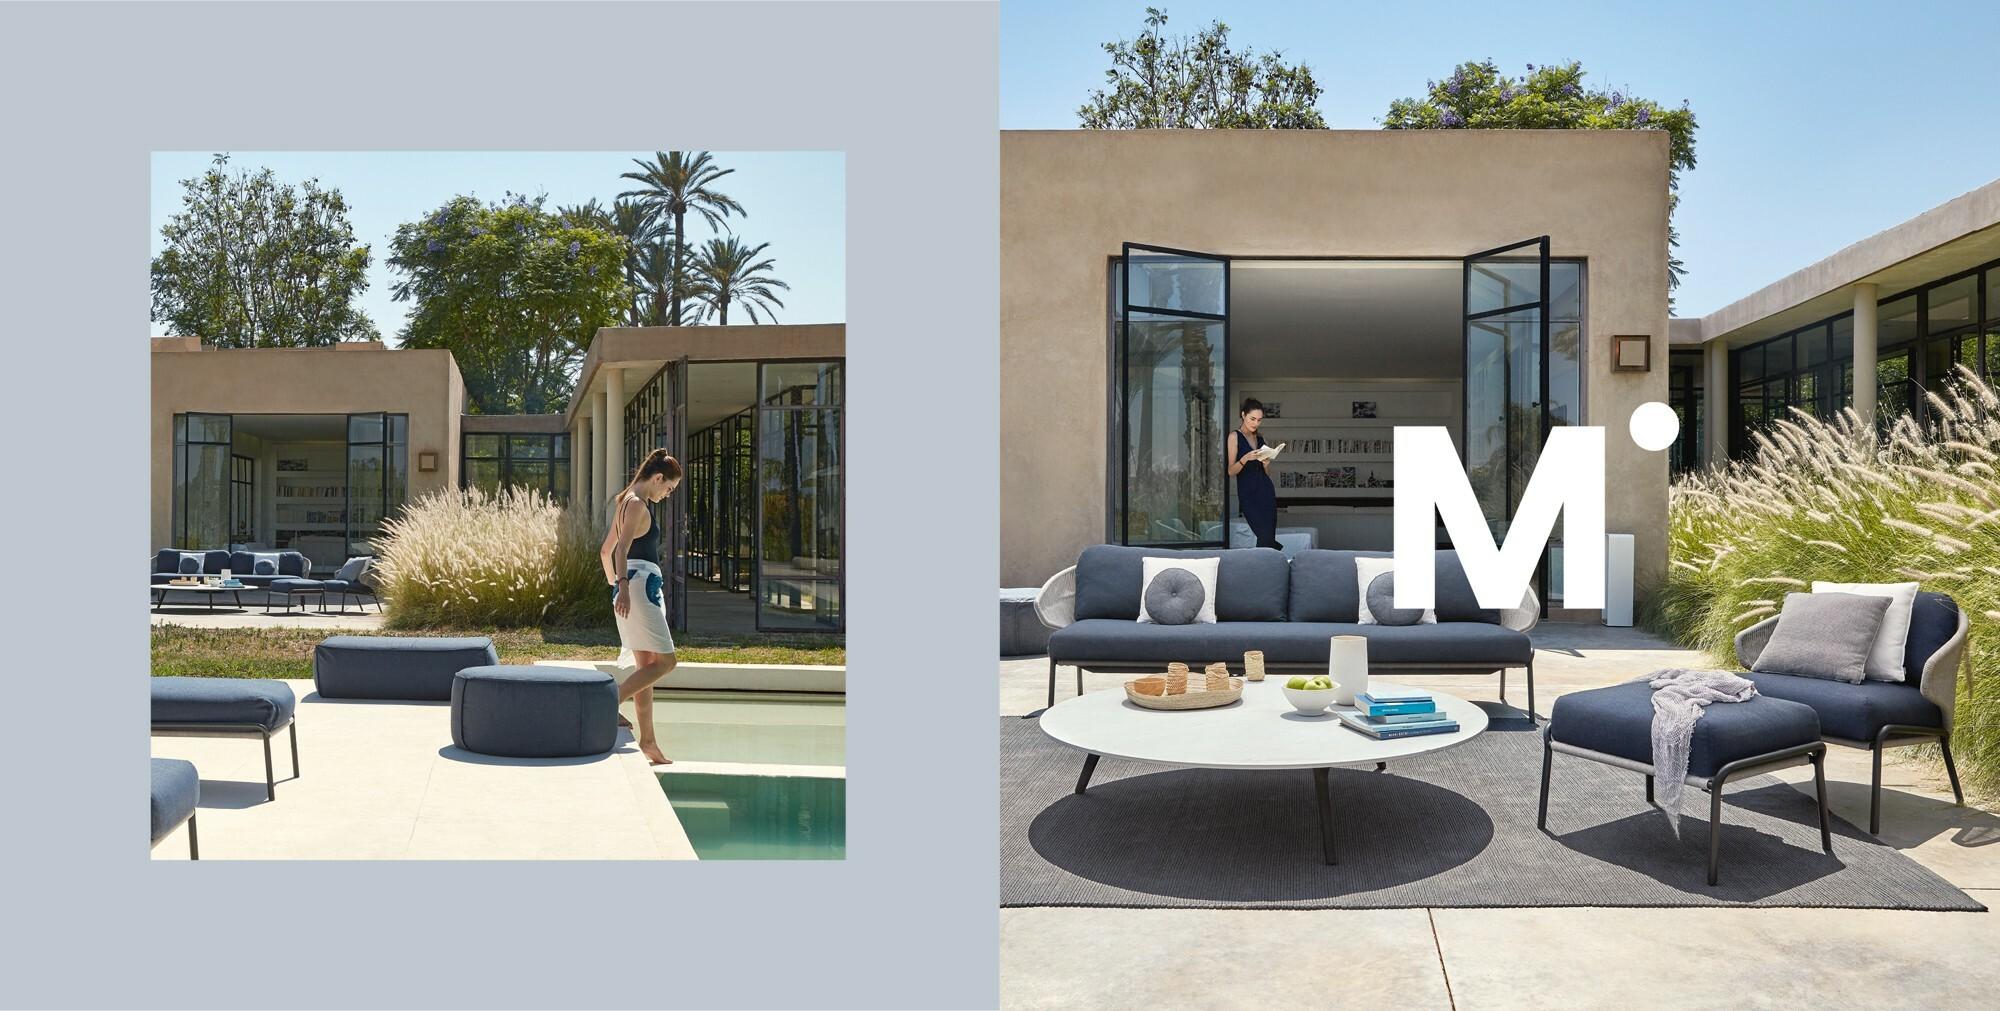 Radoc sofa and loungers with Mood coffee table by the pool